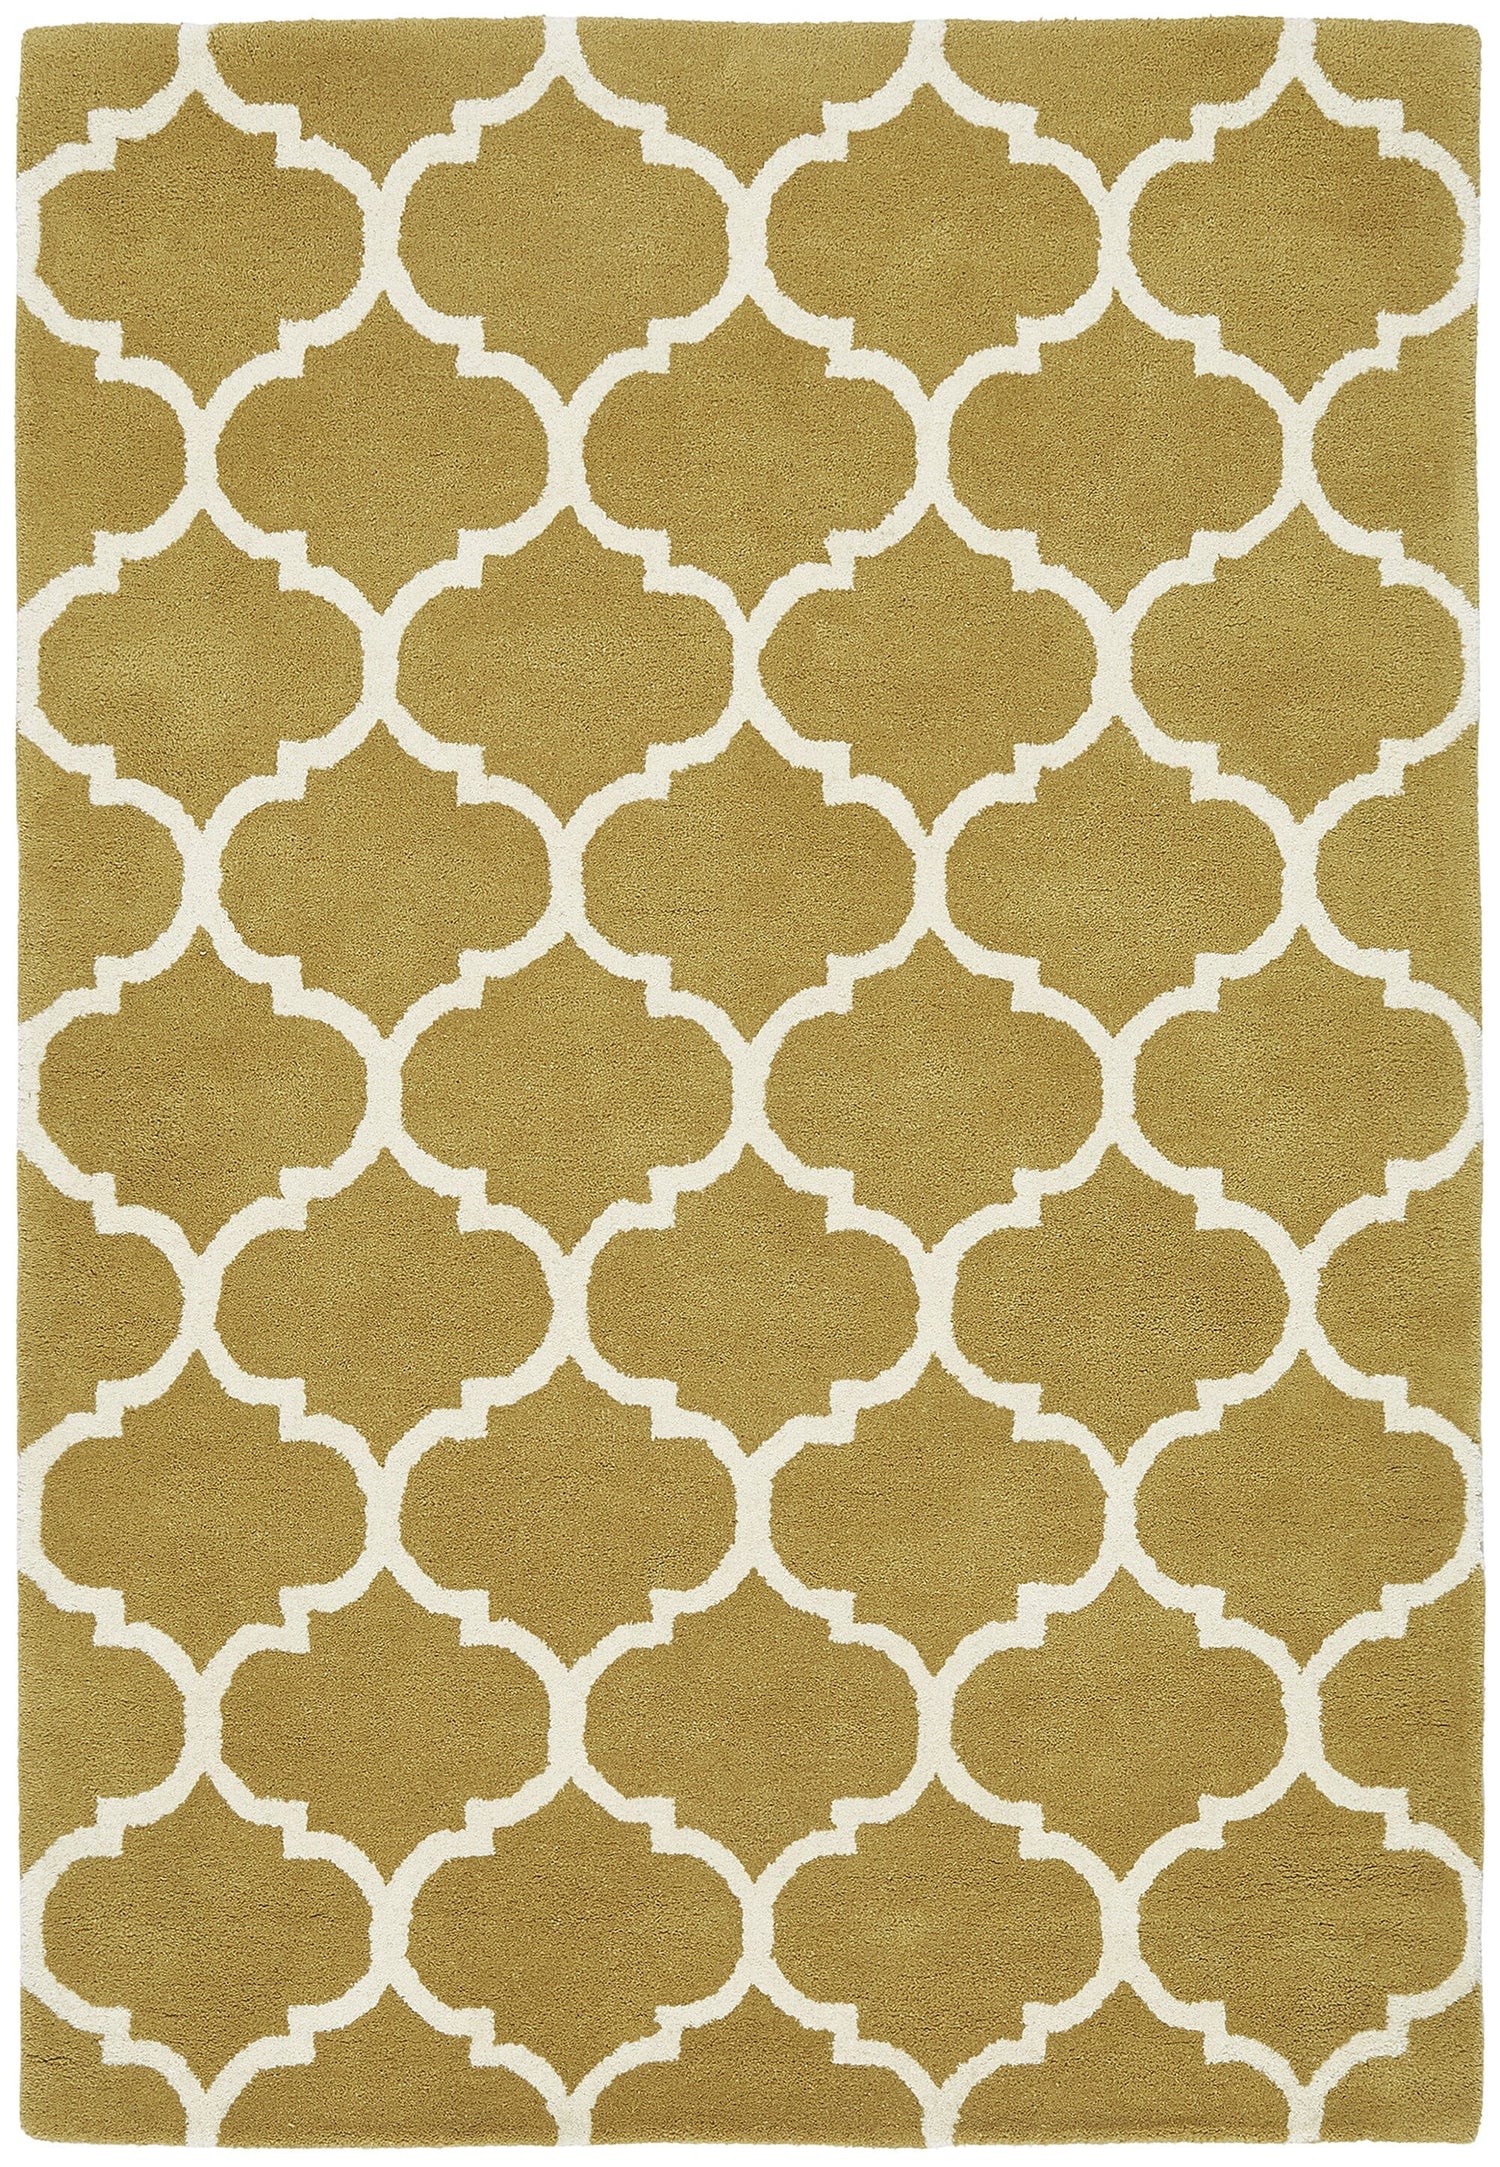  Asiatic Carpets-Asiatic Carpets Albany Handtufted Rug Ogee Ochre - 160 x 230cm-Yellow, Gold 485 